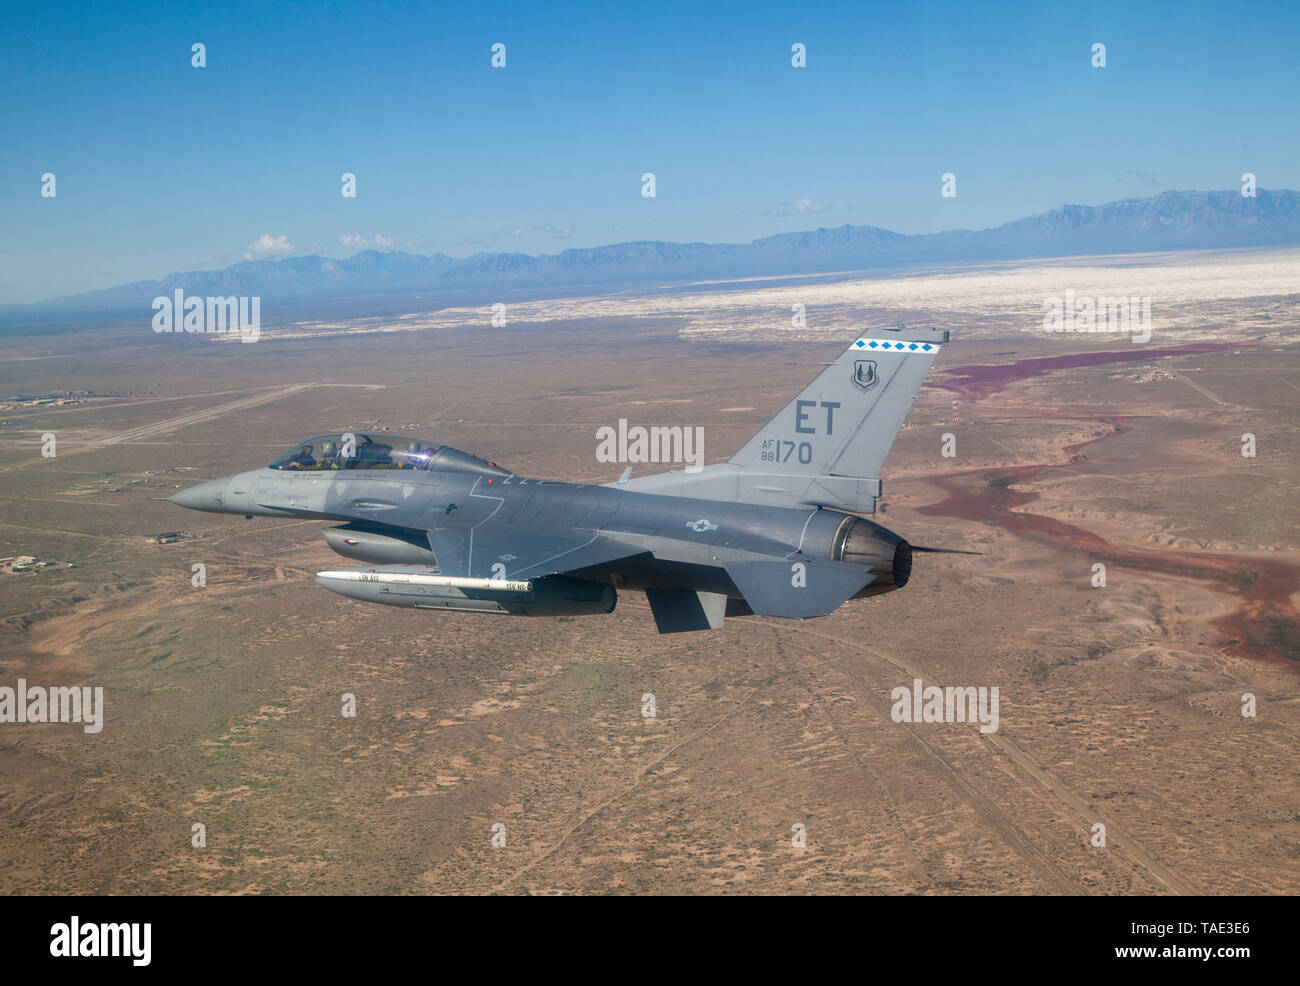 Capt. Spencer 'Memphis' Bell, 40th Flight Test Squadron Pilot and Tech. Sgt. John Raven, 40th FLTS Photographer fly near White Sands National Monument near Holloman Air Force Base, New Mexico, Apr. 24, 2019. This was the first time this AIM-9X was used against a QF-16.  (U.S. Air Force photo by Mr. Don Allen) Stock Photo